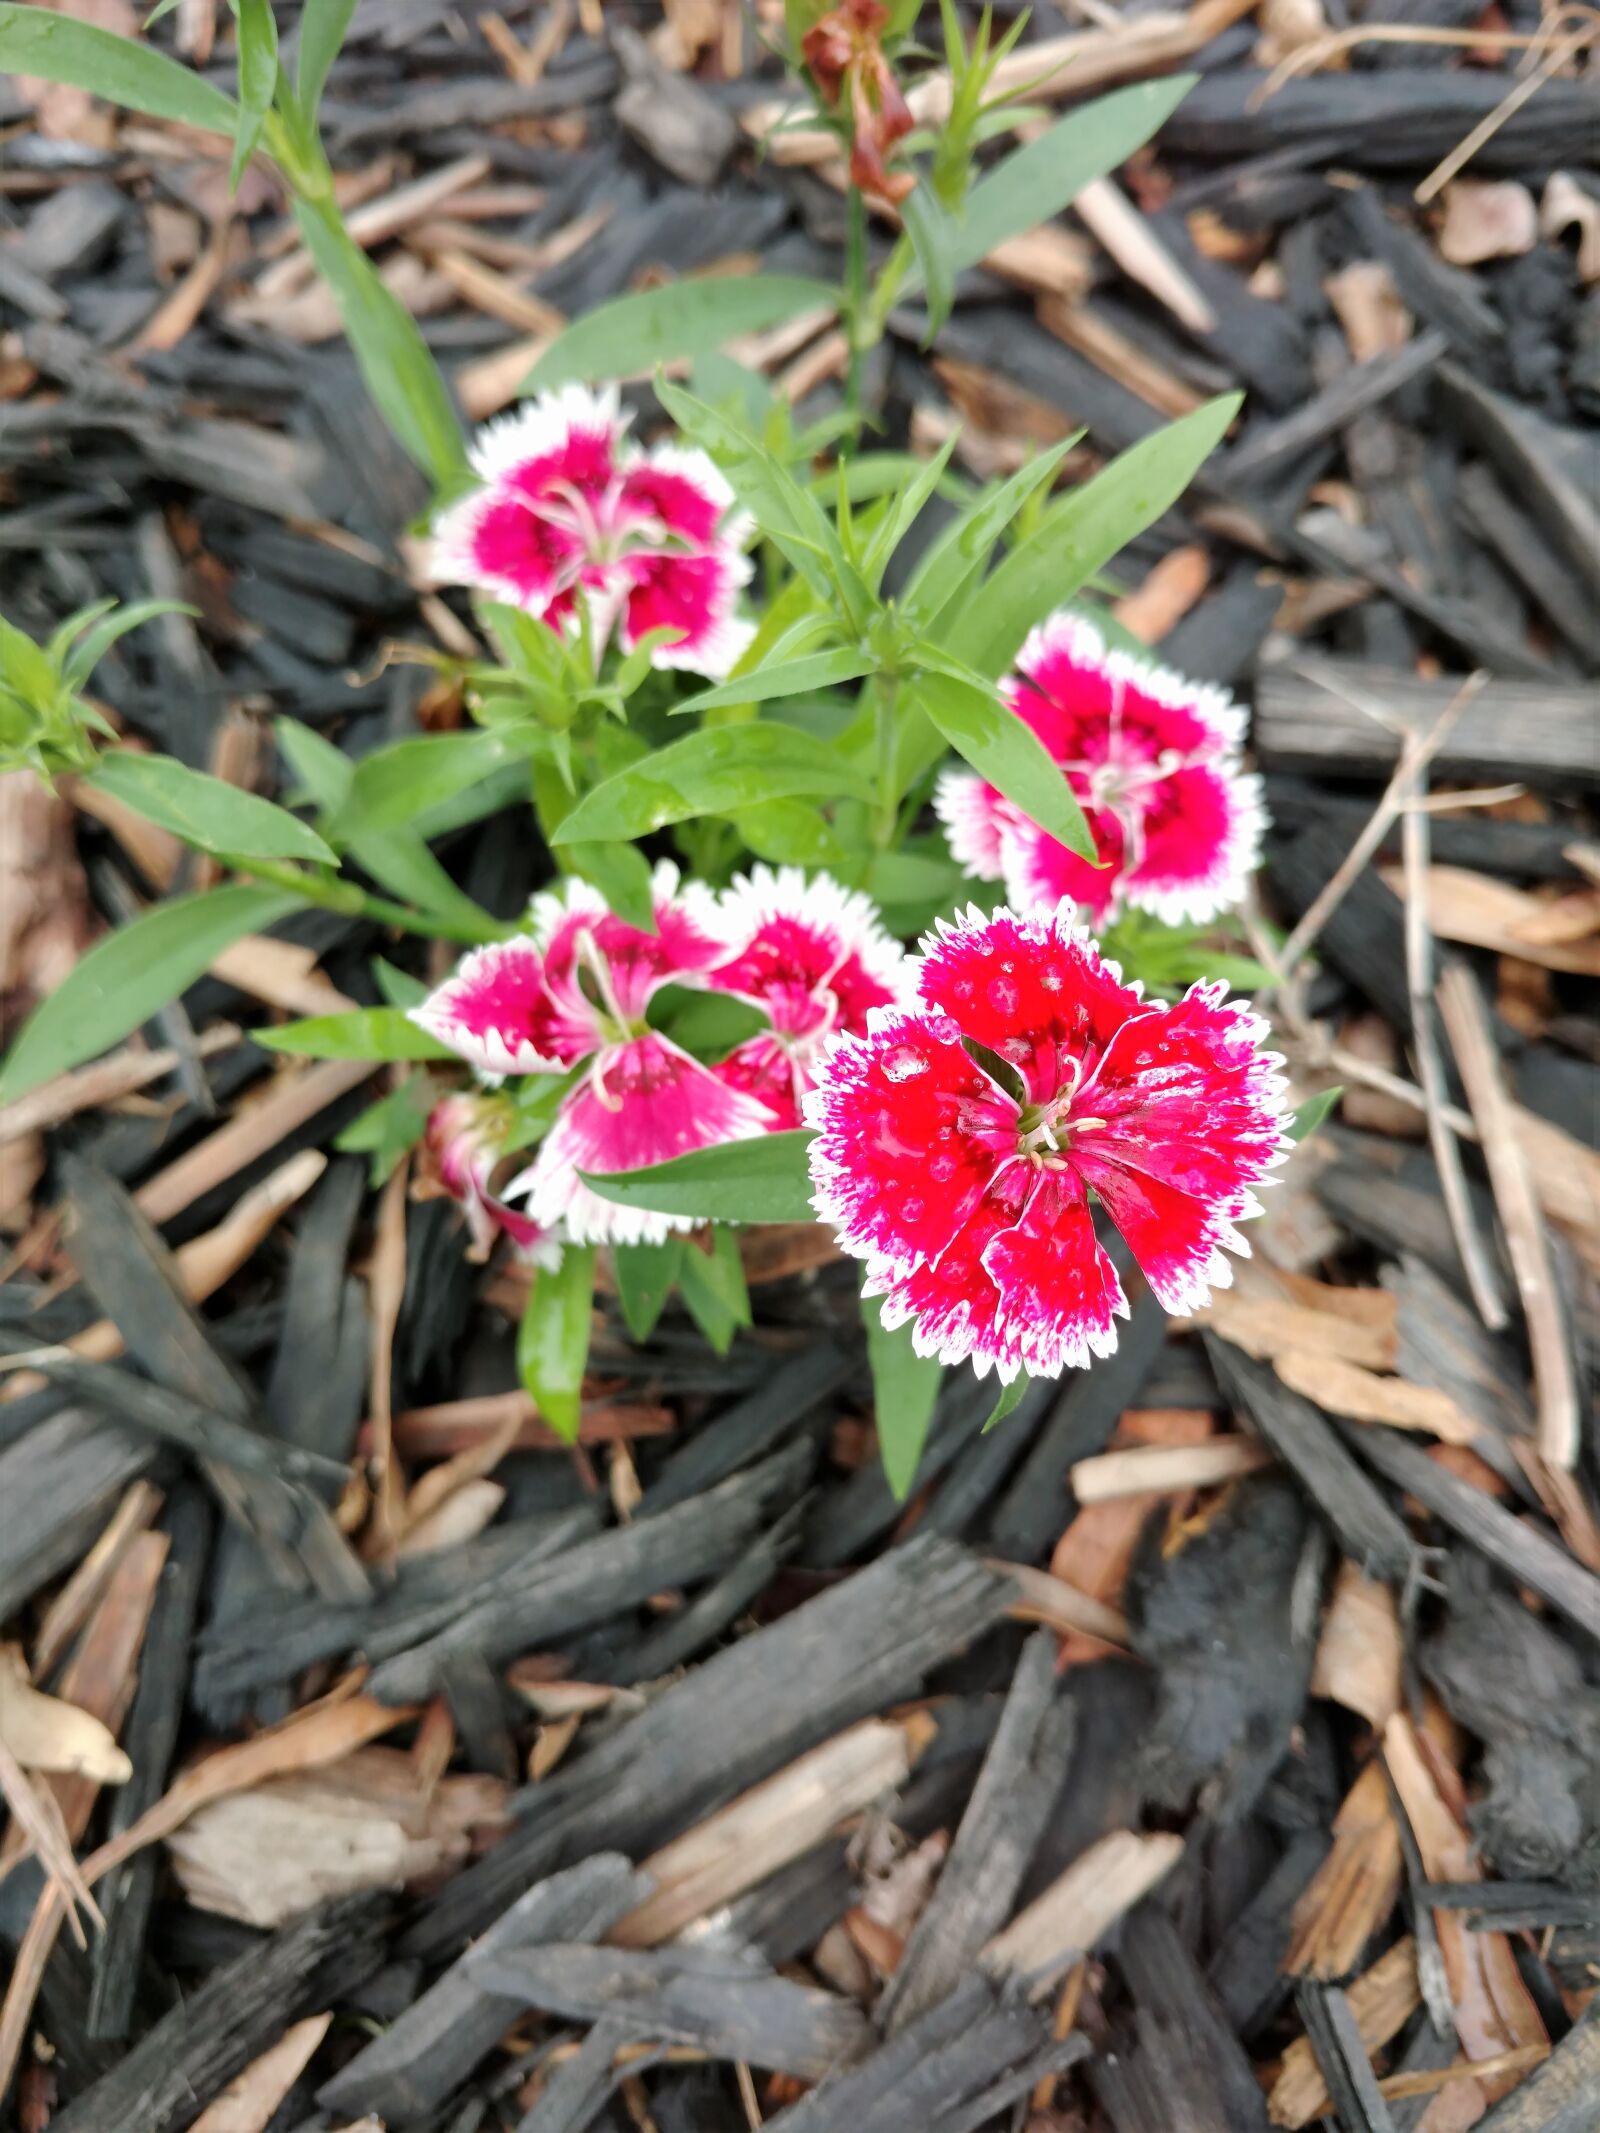 Motorola DROID Turbo 2 sample photo. Flowers, red and white photography